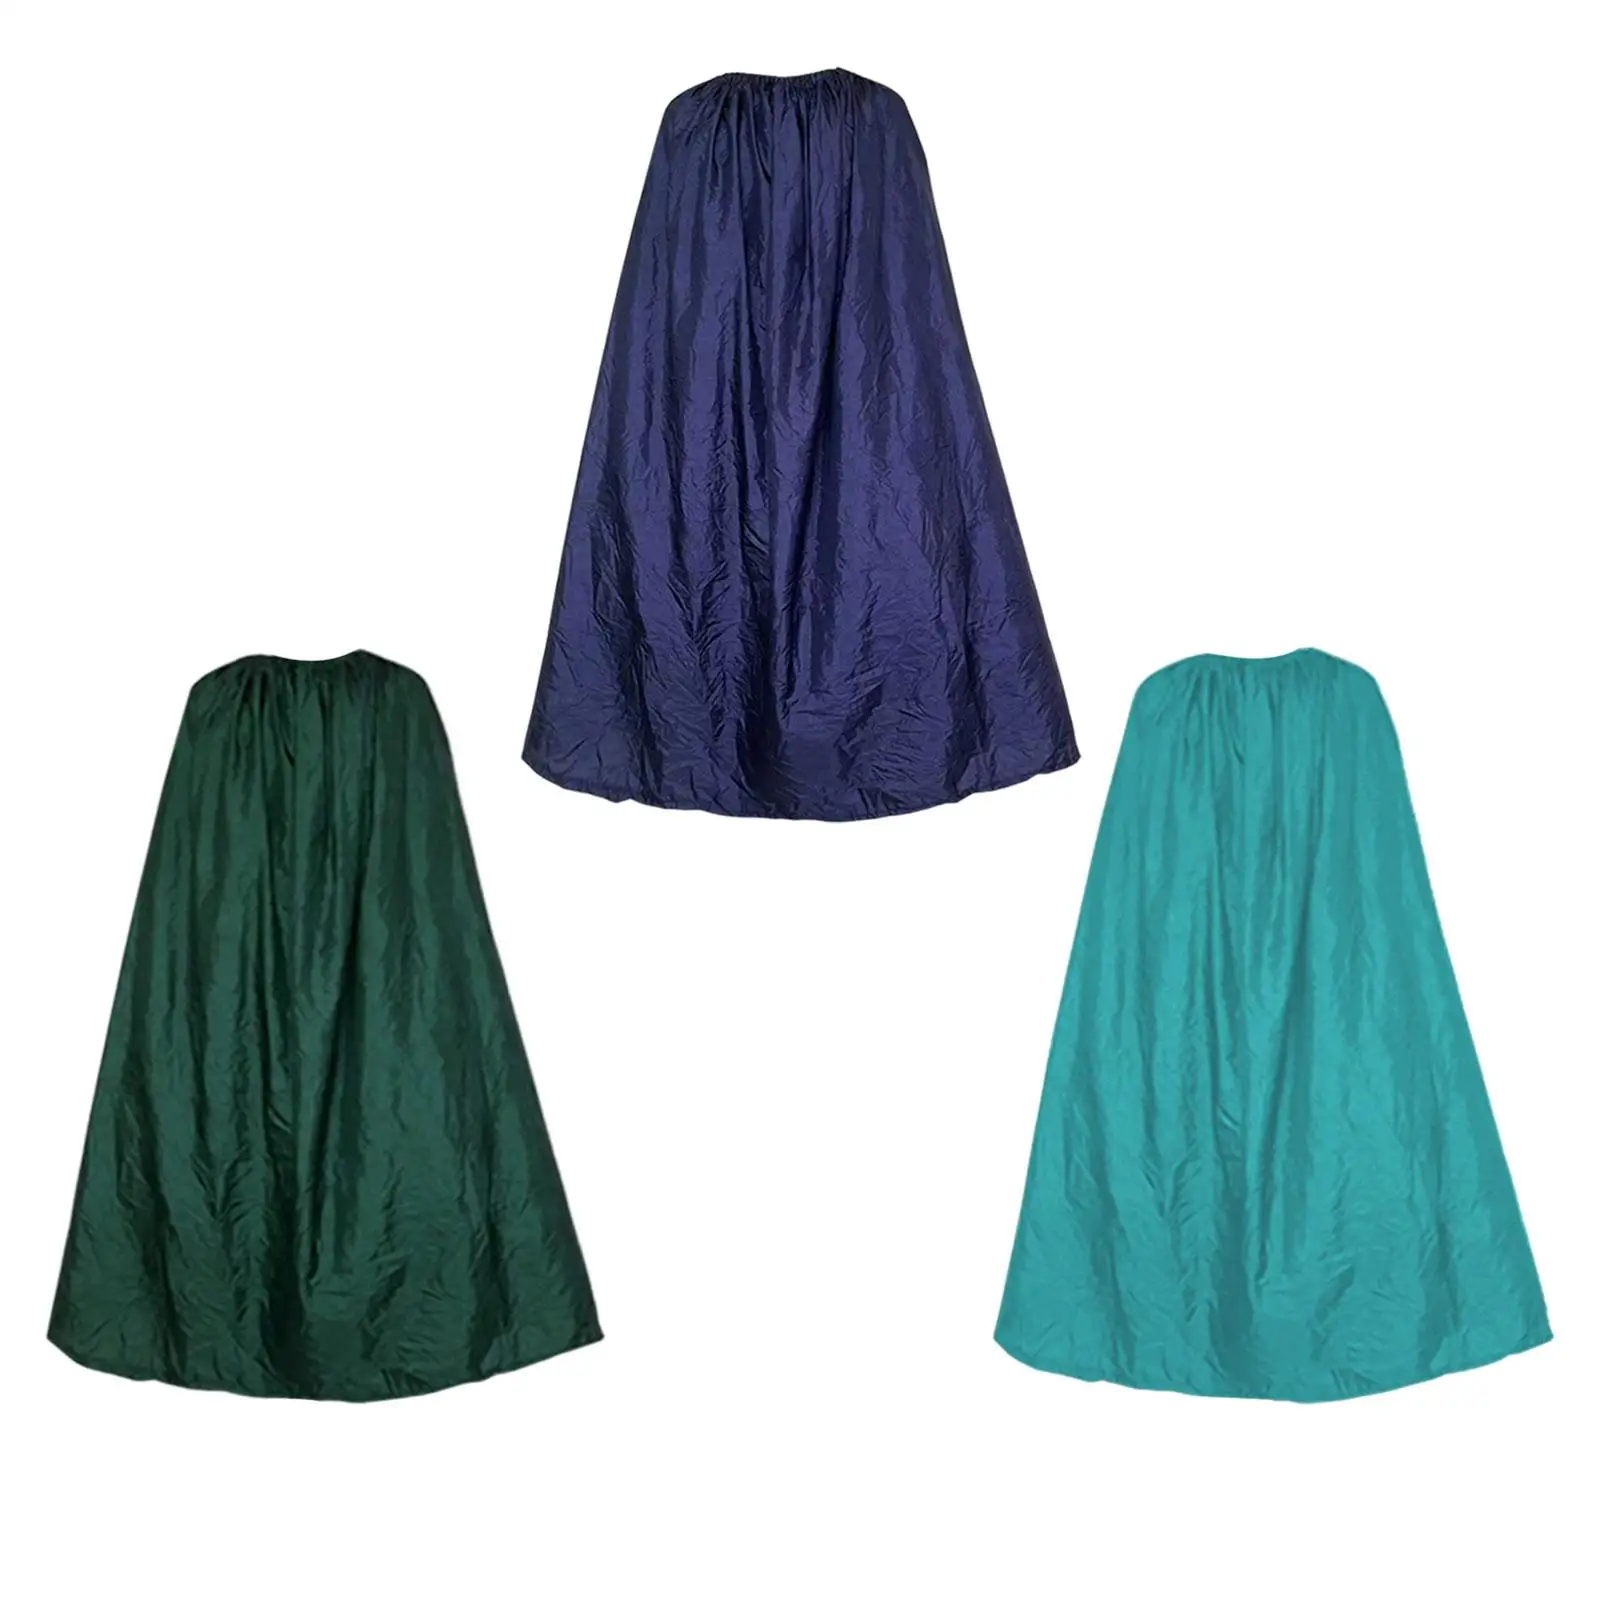 Portable Changing Room Privacy Shelter Accessory Multipurpose Comfortable Dressing Cover Changing Cover up for Outdoor Dancer